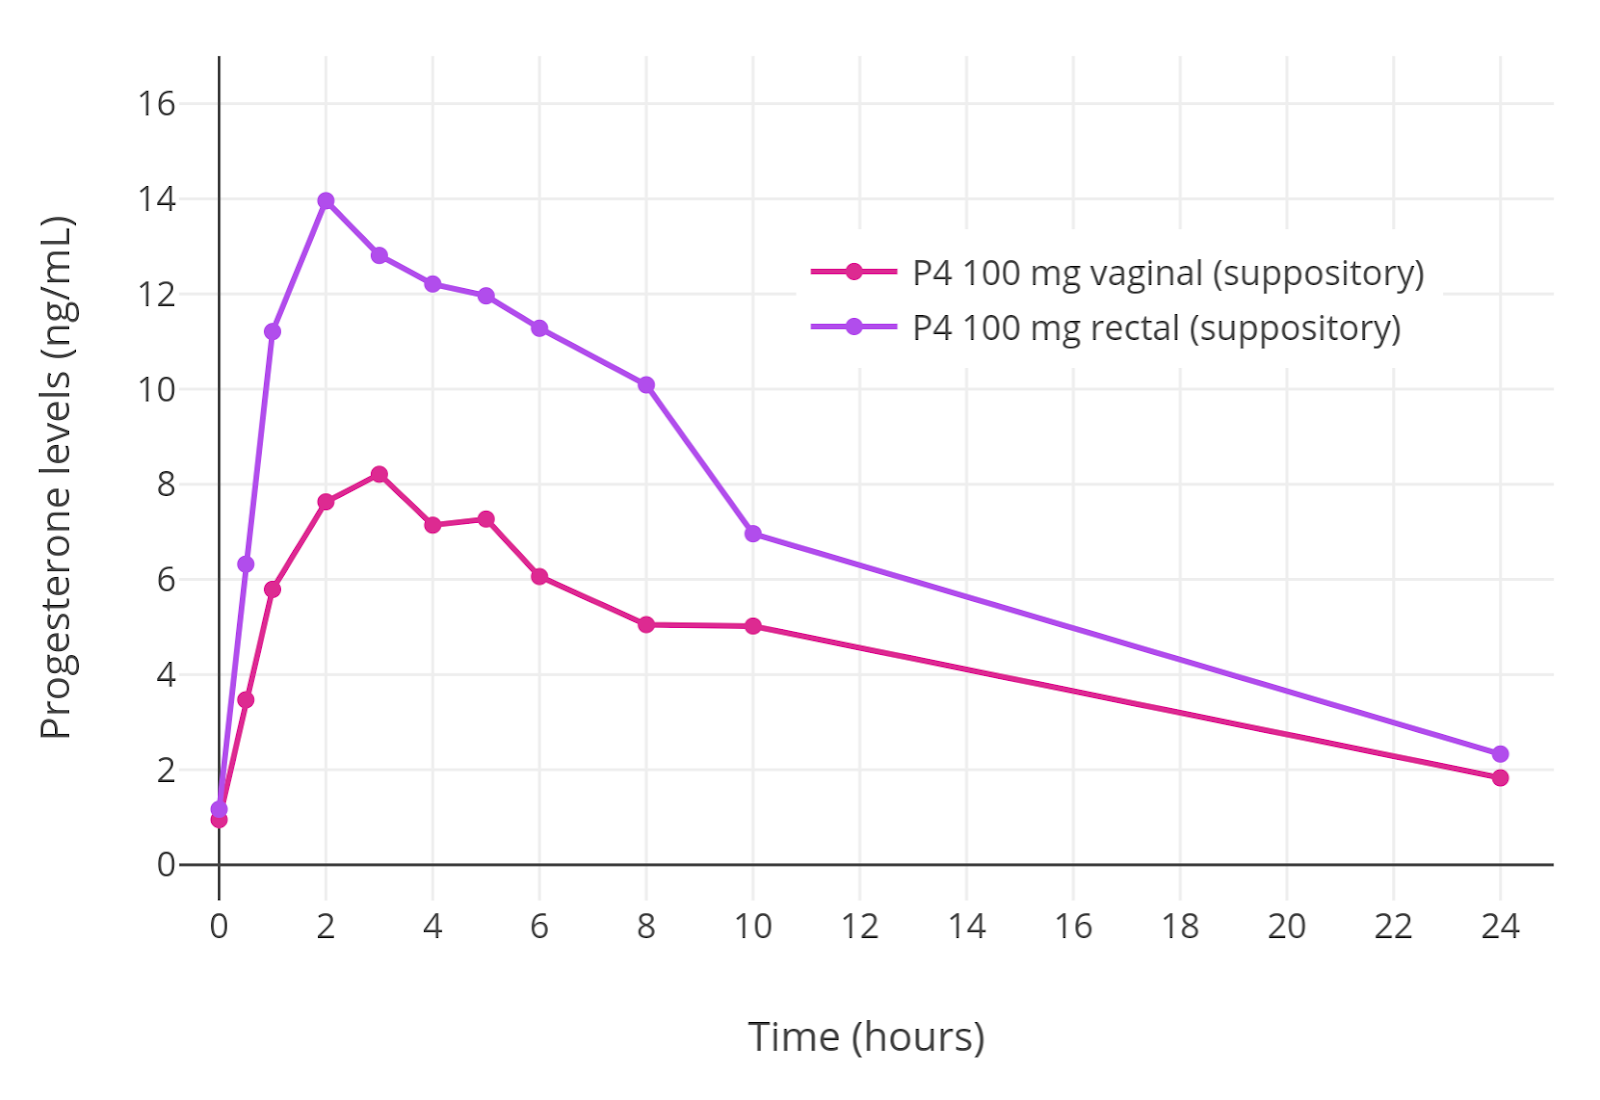 Progesterone_levels_with_100_mg_rectal_or_vaginal_progesterone_in_women